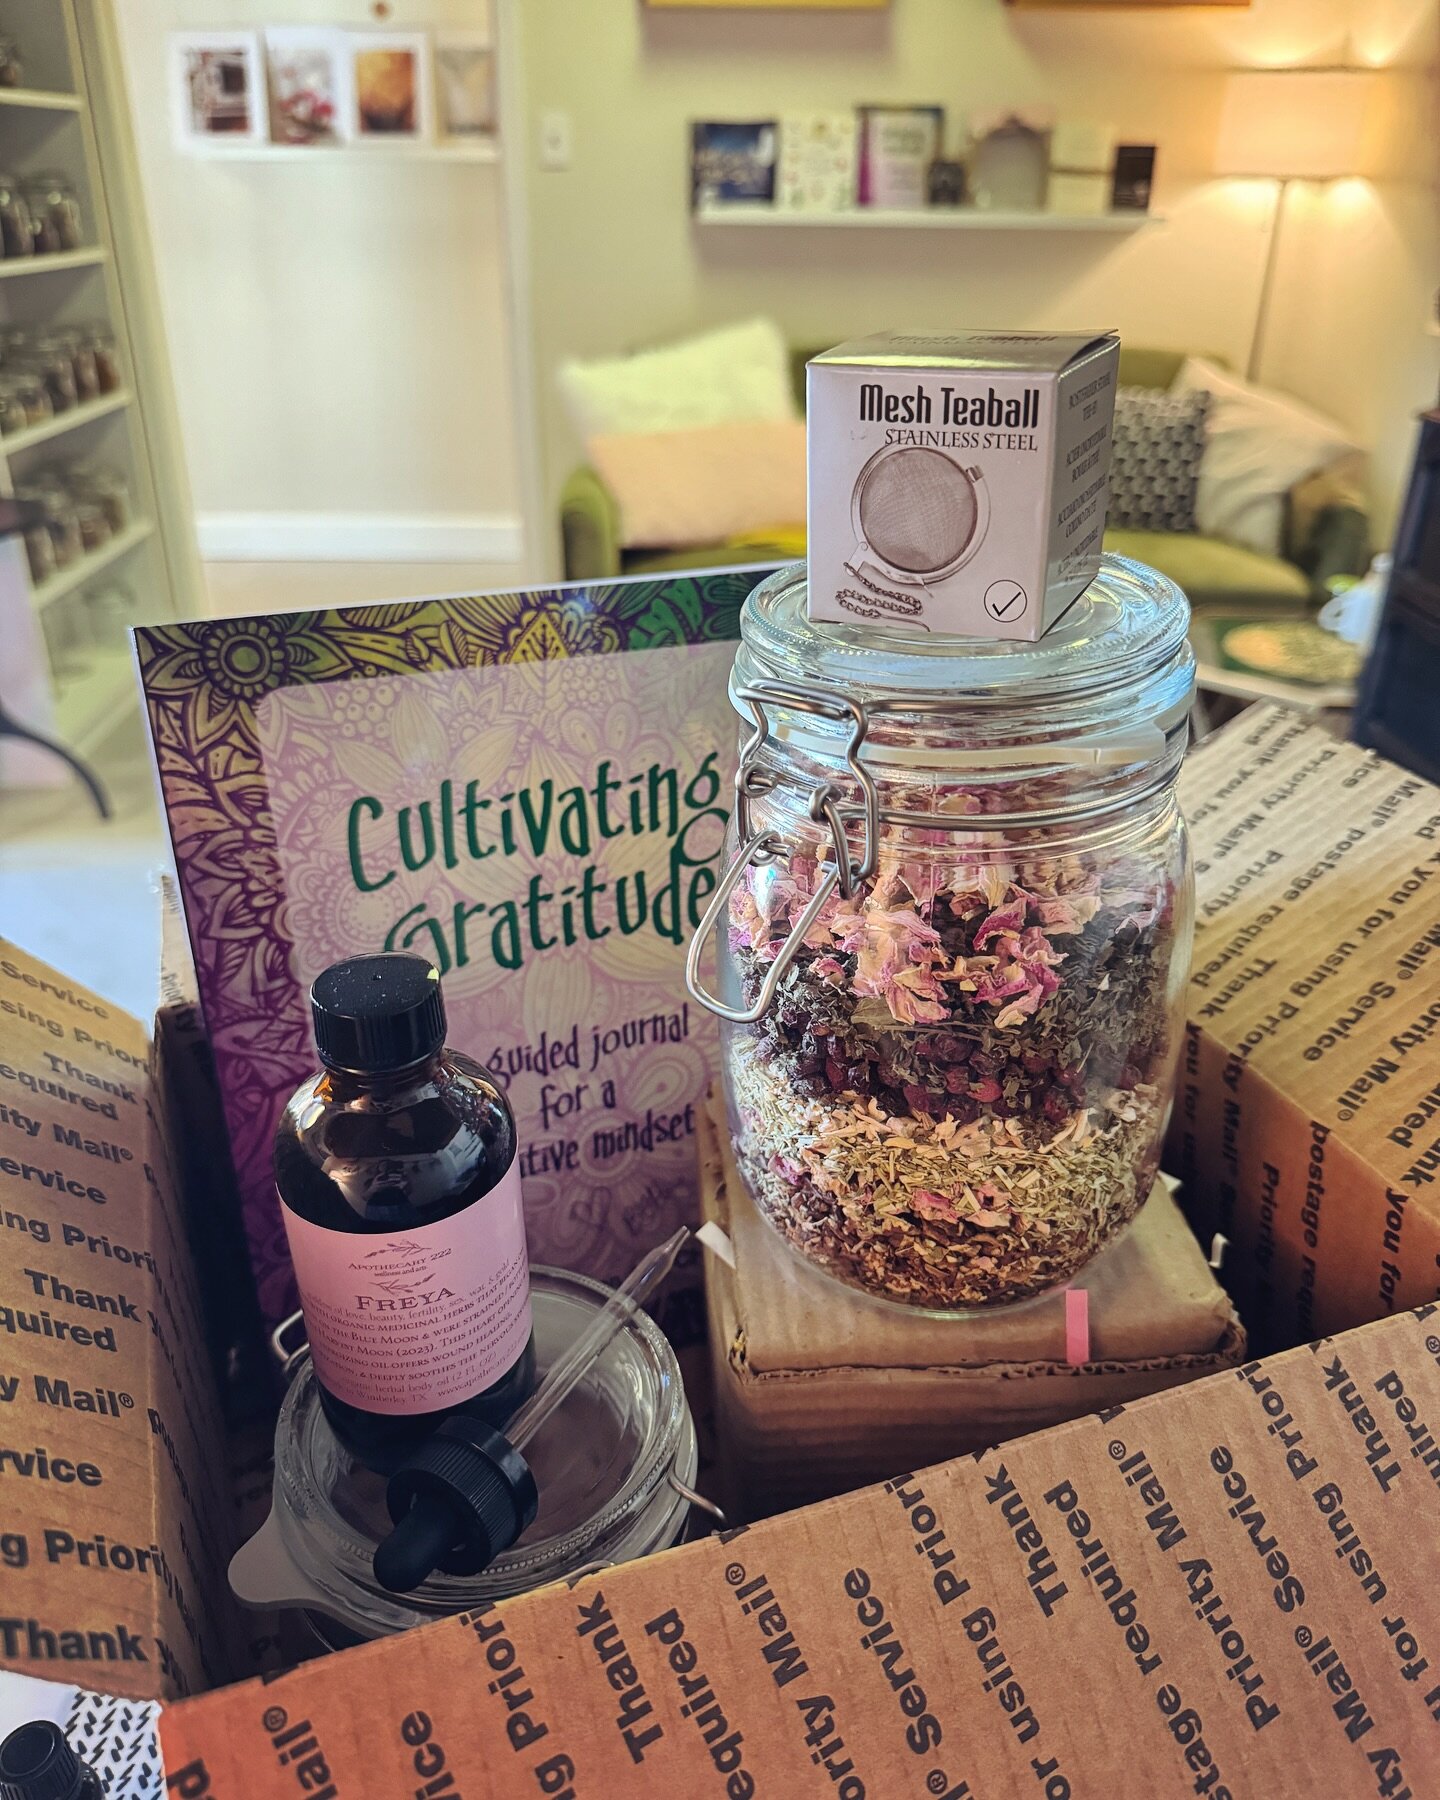 This package is headed to DFW today:⁣
⁣
💗 A bottle of Freya, my handcrafted organic herbal body oil to heal, repair, and open the heart space as well as calm the nerves. ⁣
⁣
(only 2 bottles left in stock!)⁣
⁣
🙏 Cultivating Gratitude: A guided grati